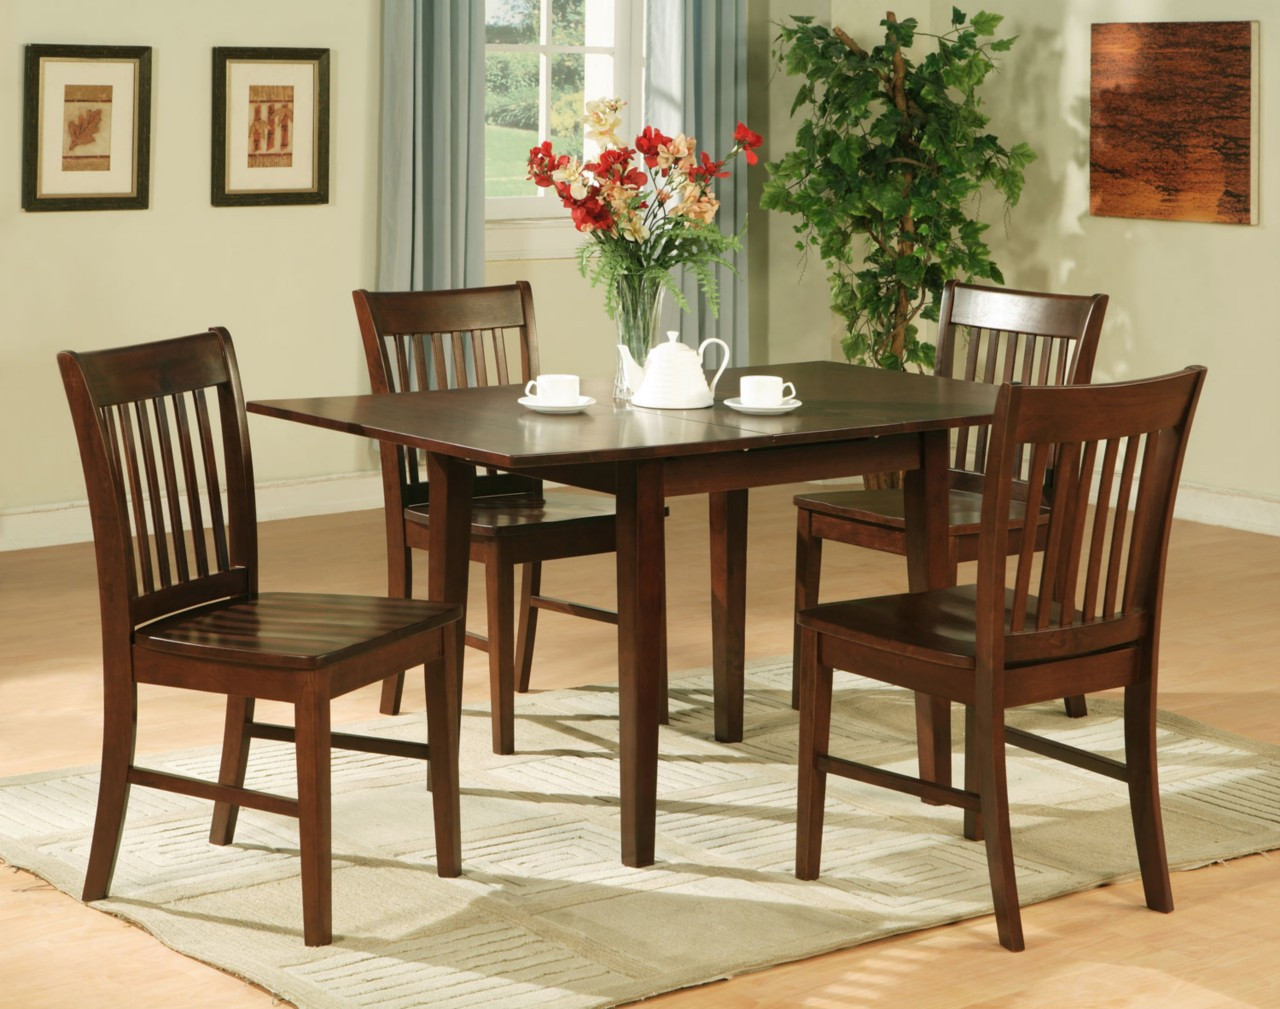 Small Rectangular Kitchen Table Sets
 5PC RECTANGULAR KITCHEN DINETTE TABLE 4 CHAIRS MAHOGANY